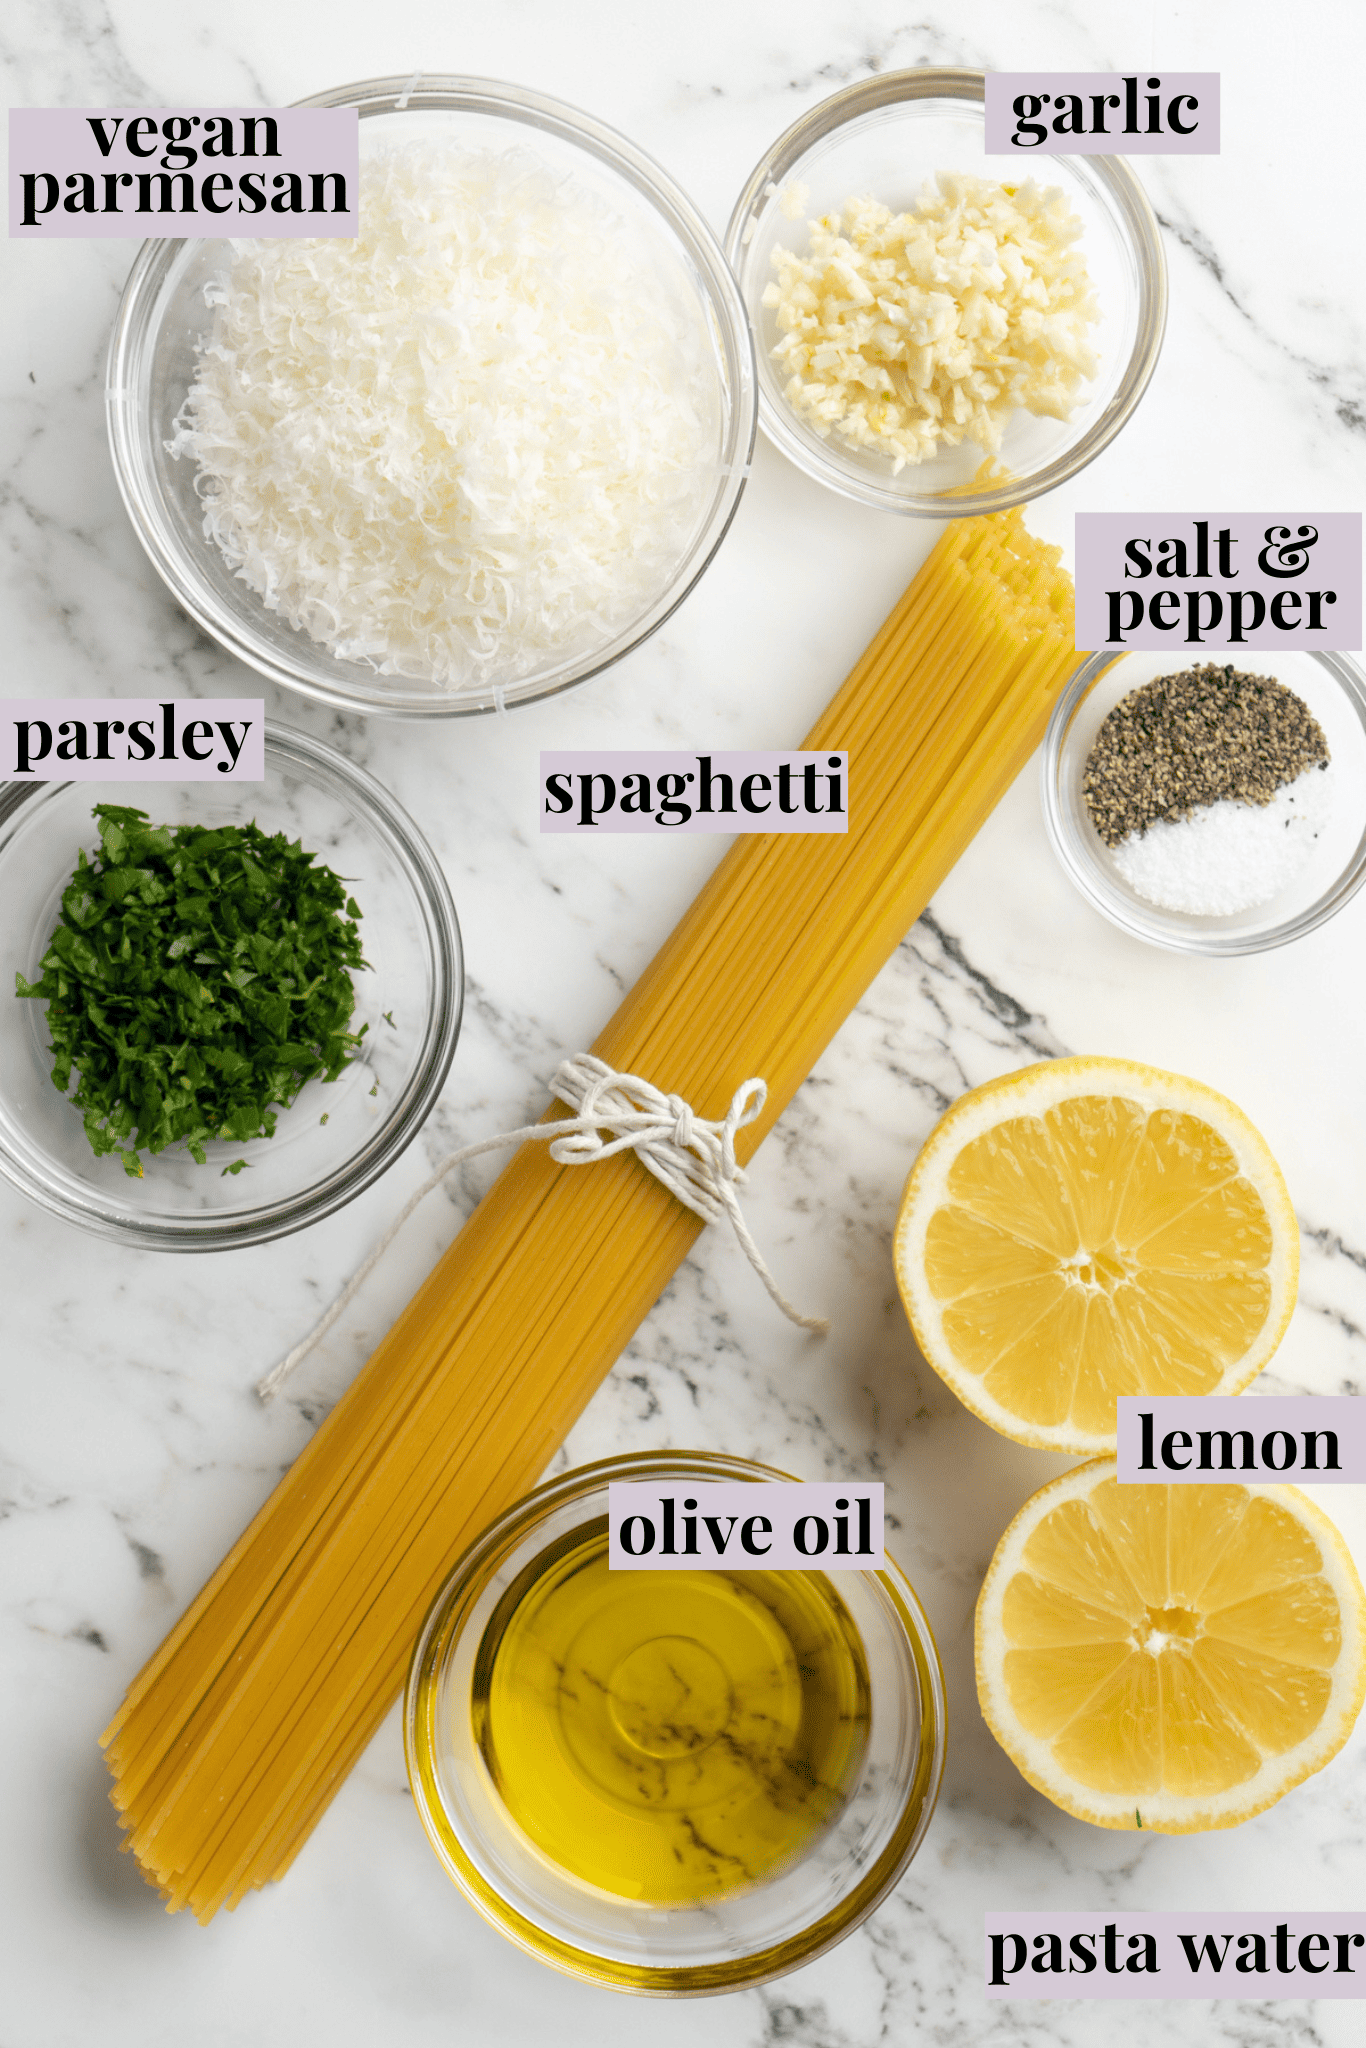 Overhead view of ingredients for lemon pasta with labels